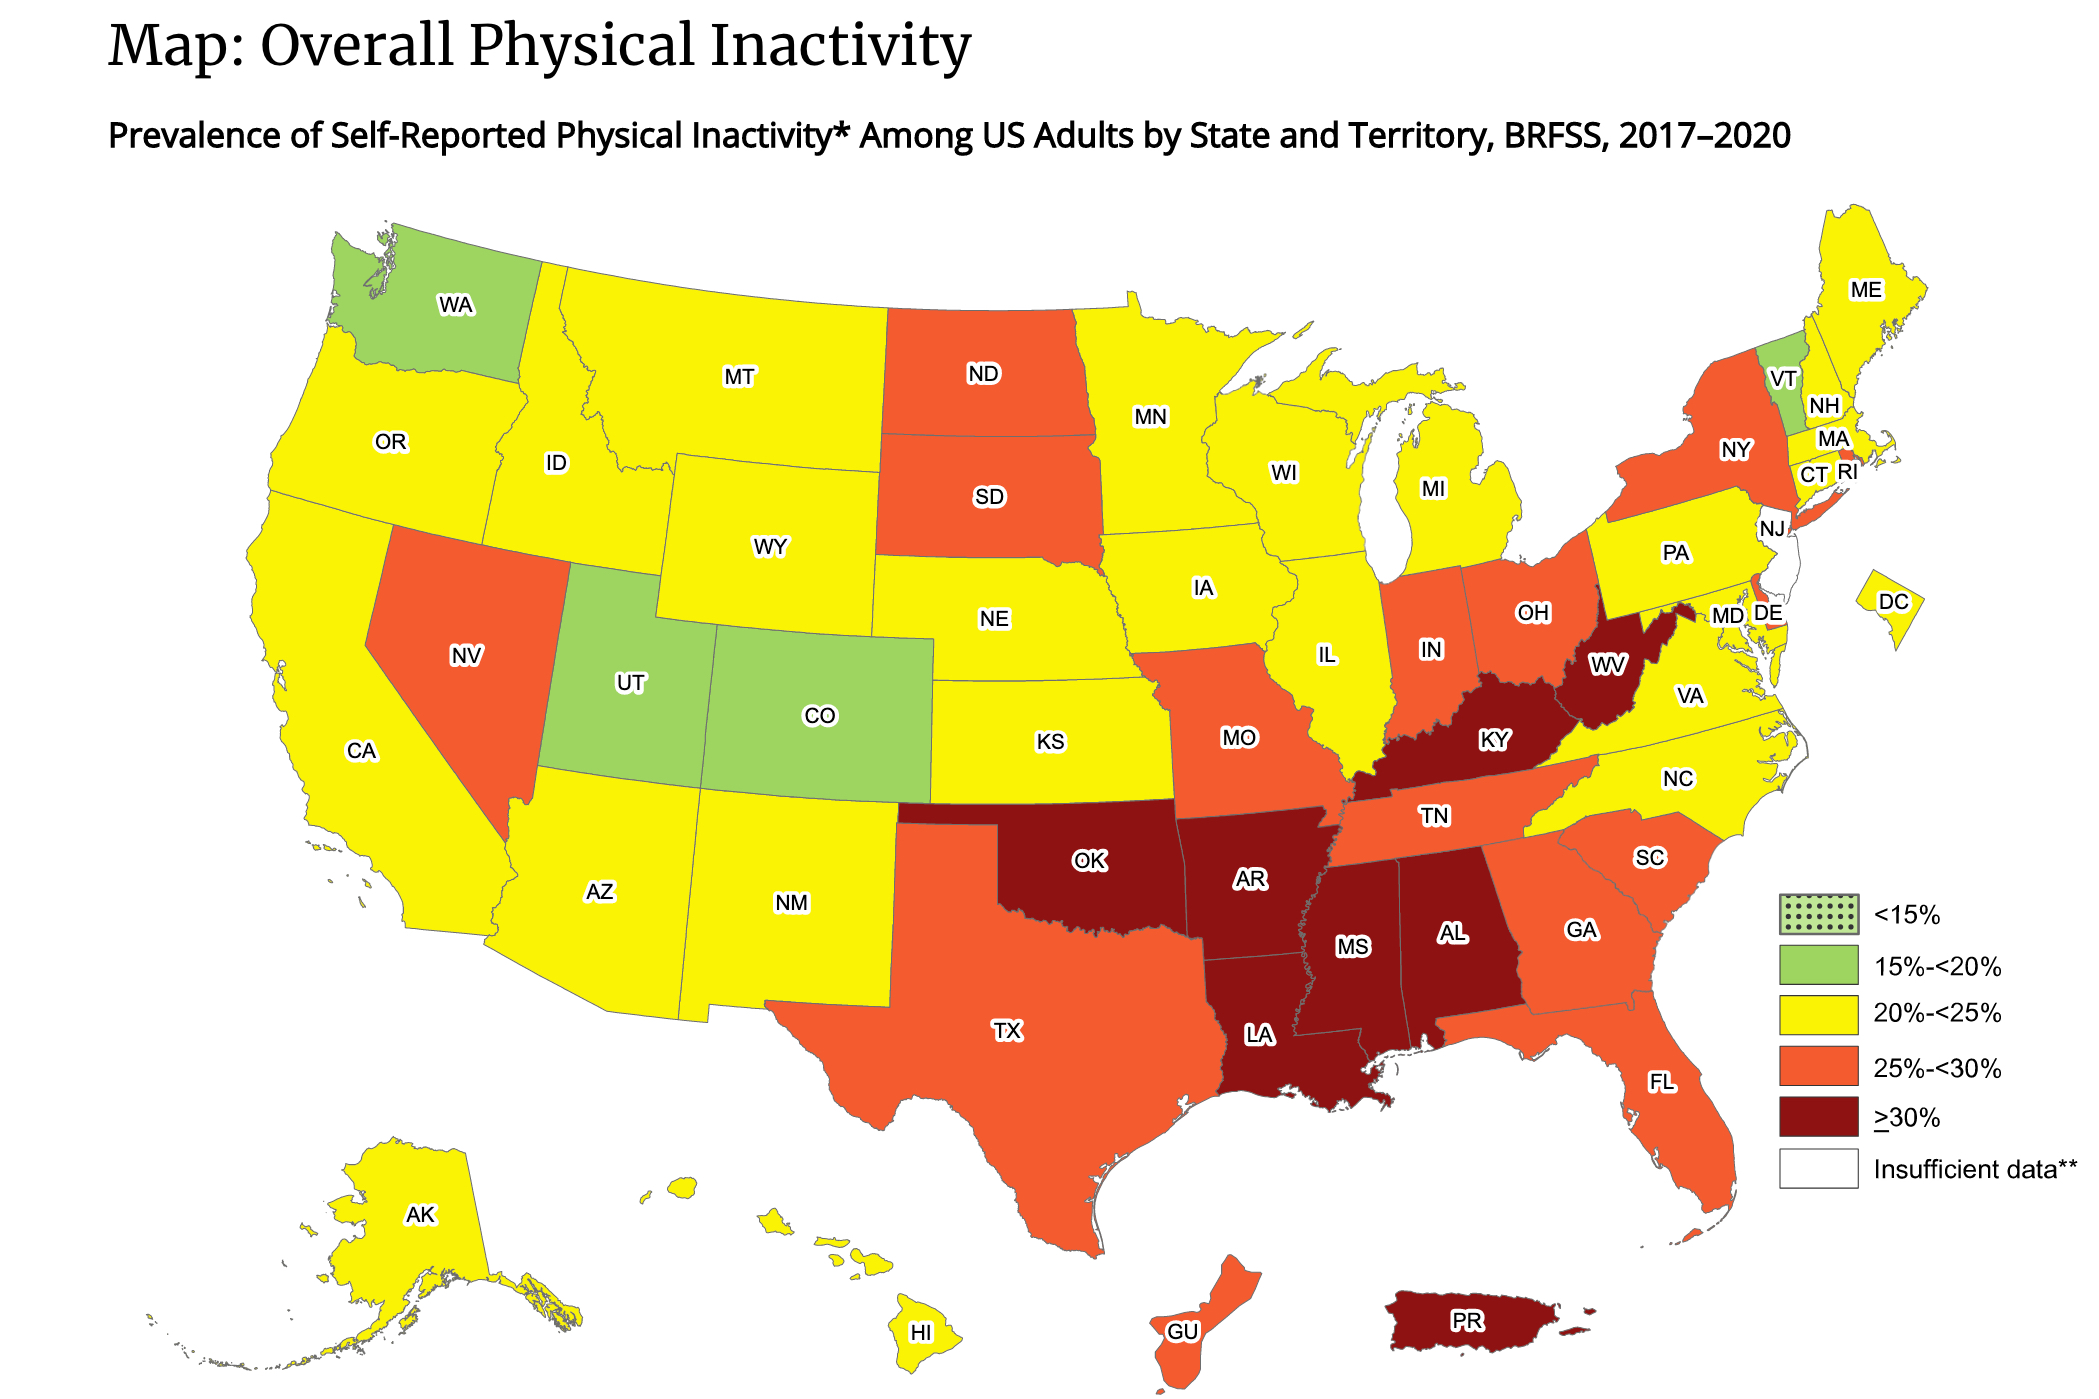 Overall physical inactivity in the United States.